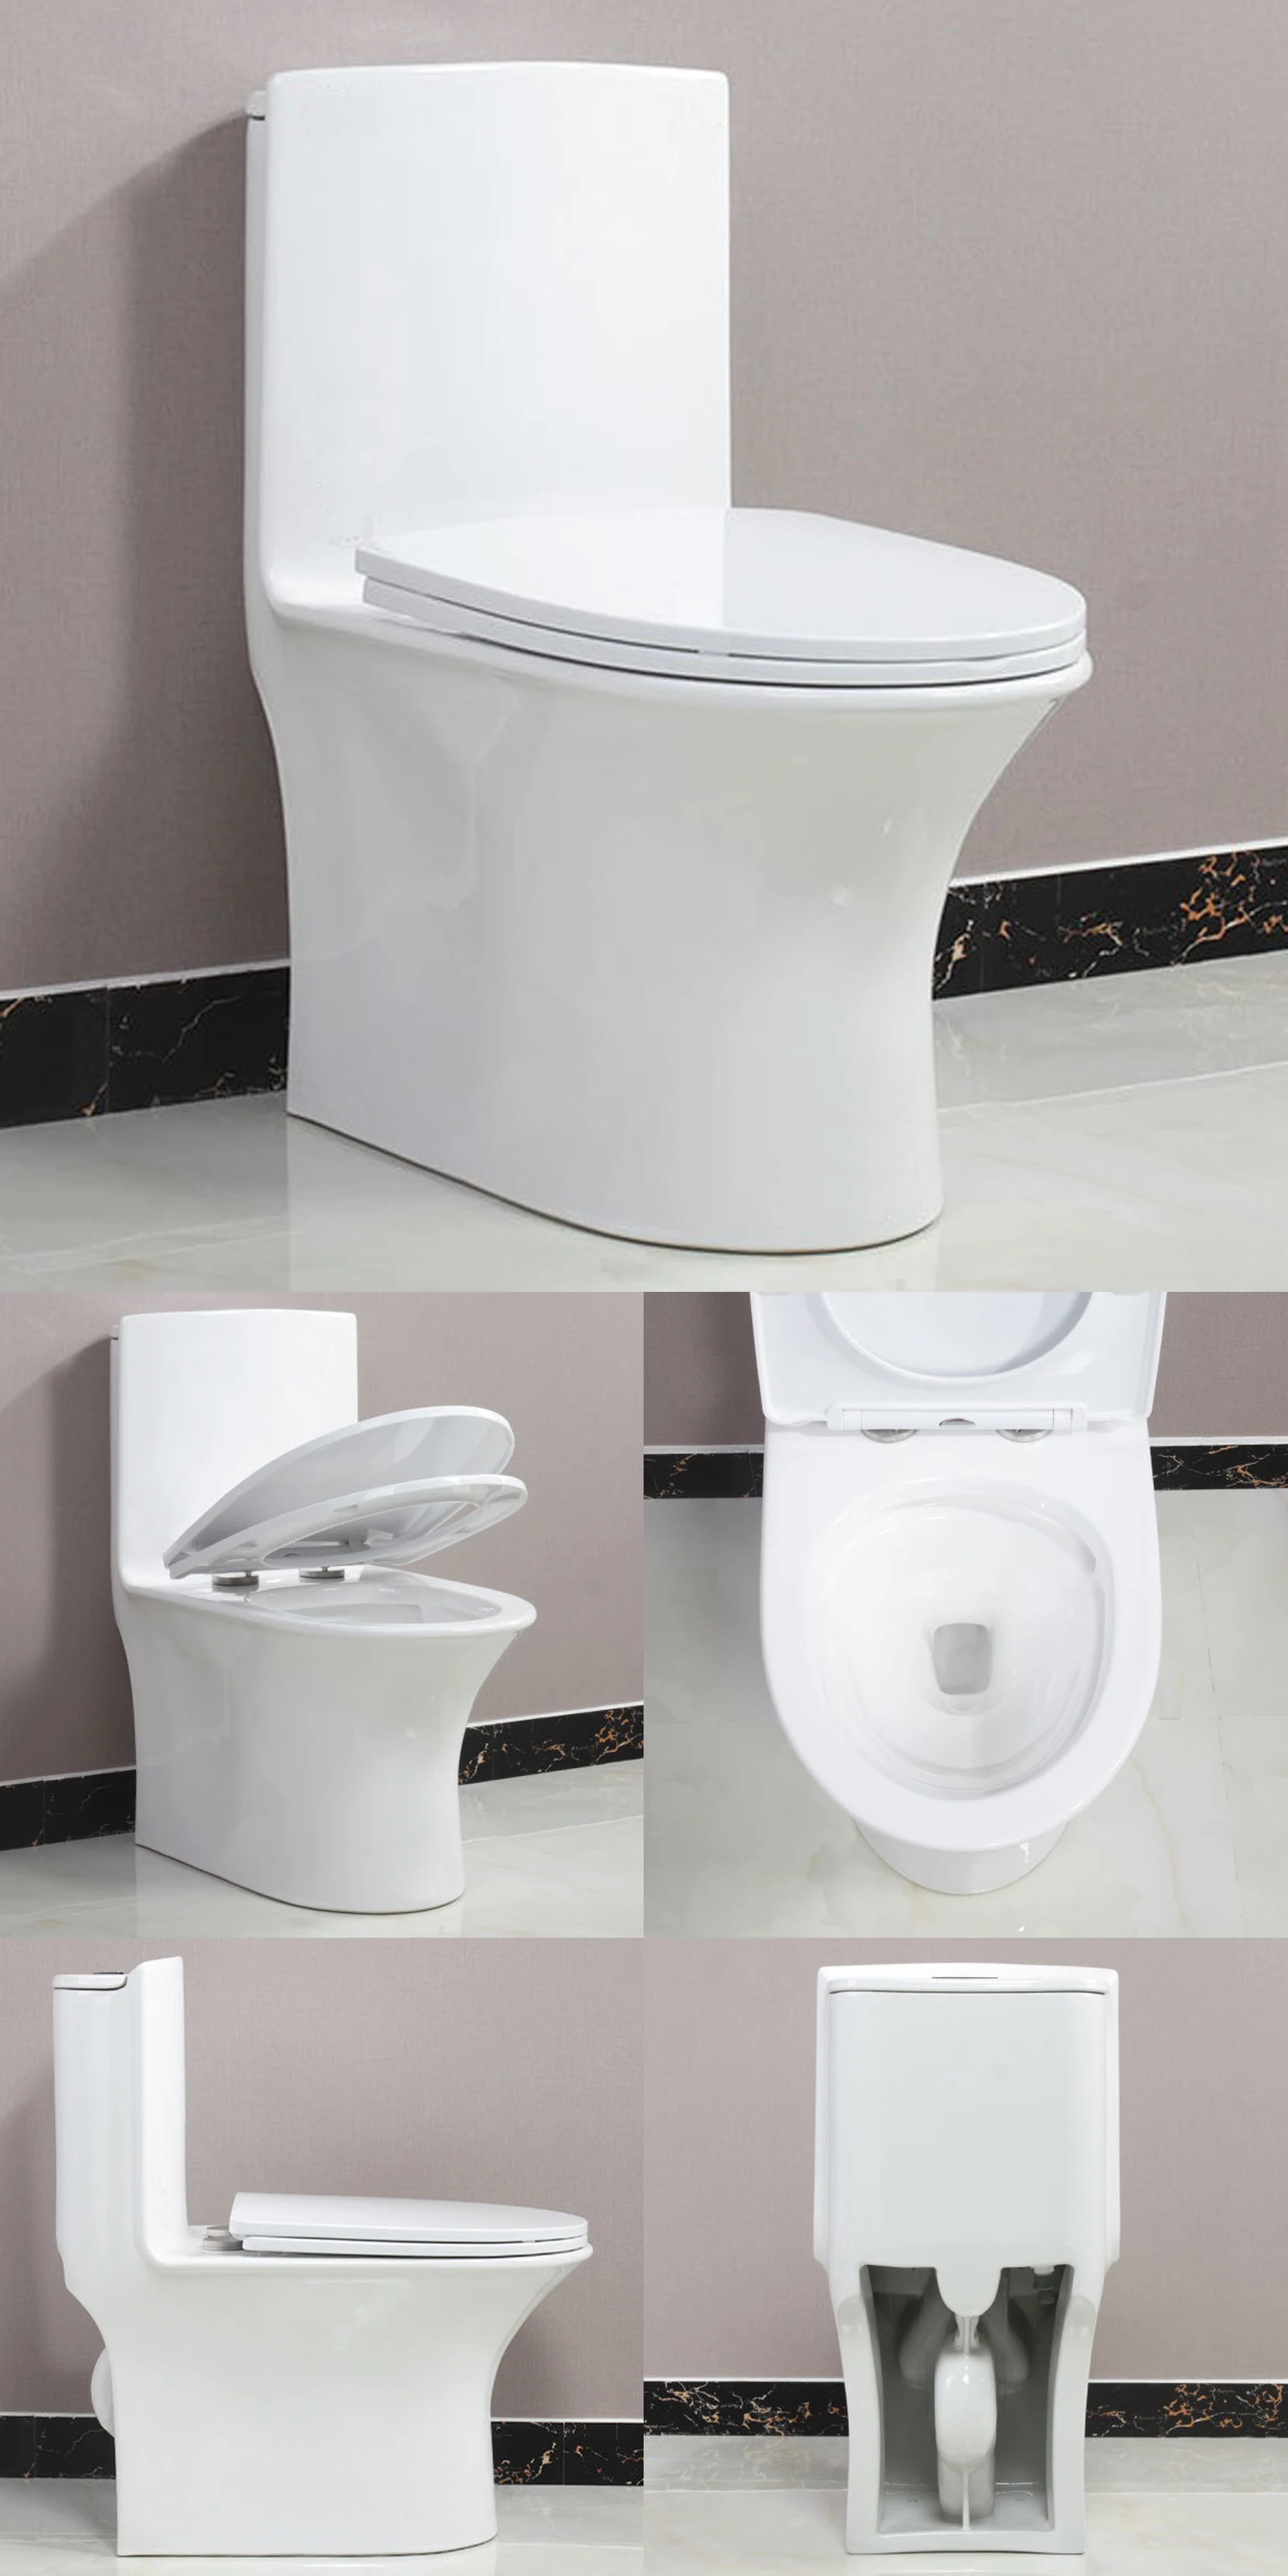 China Supplier Sanitary Ware Bathroom Wc Ceramic One Piece Toilet 1010